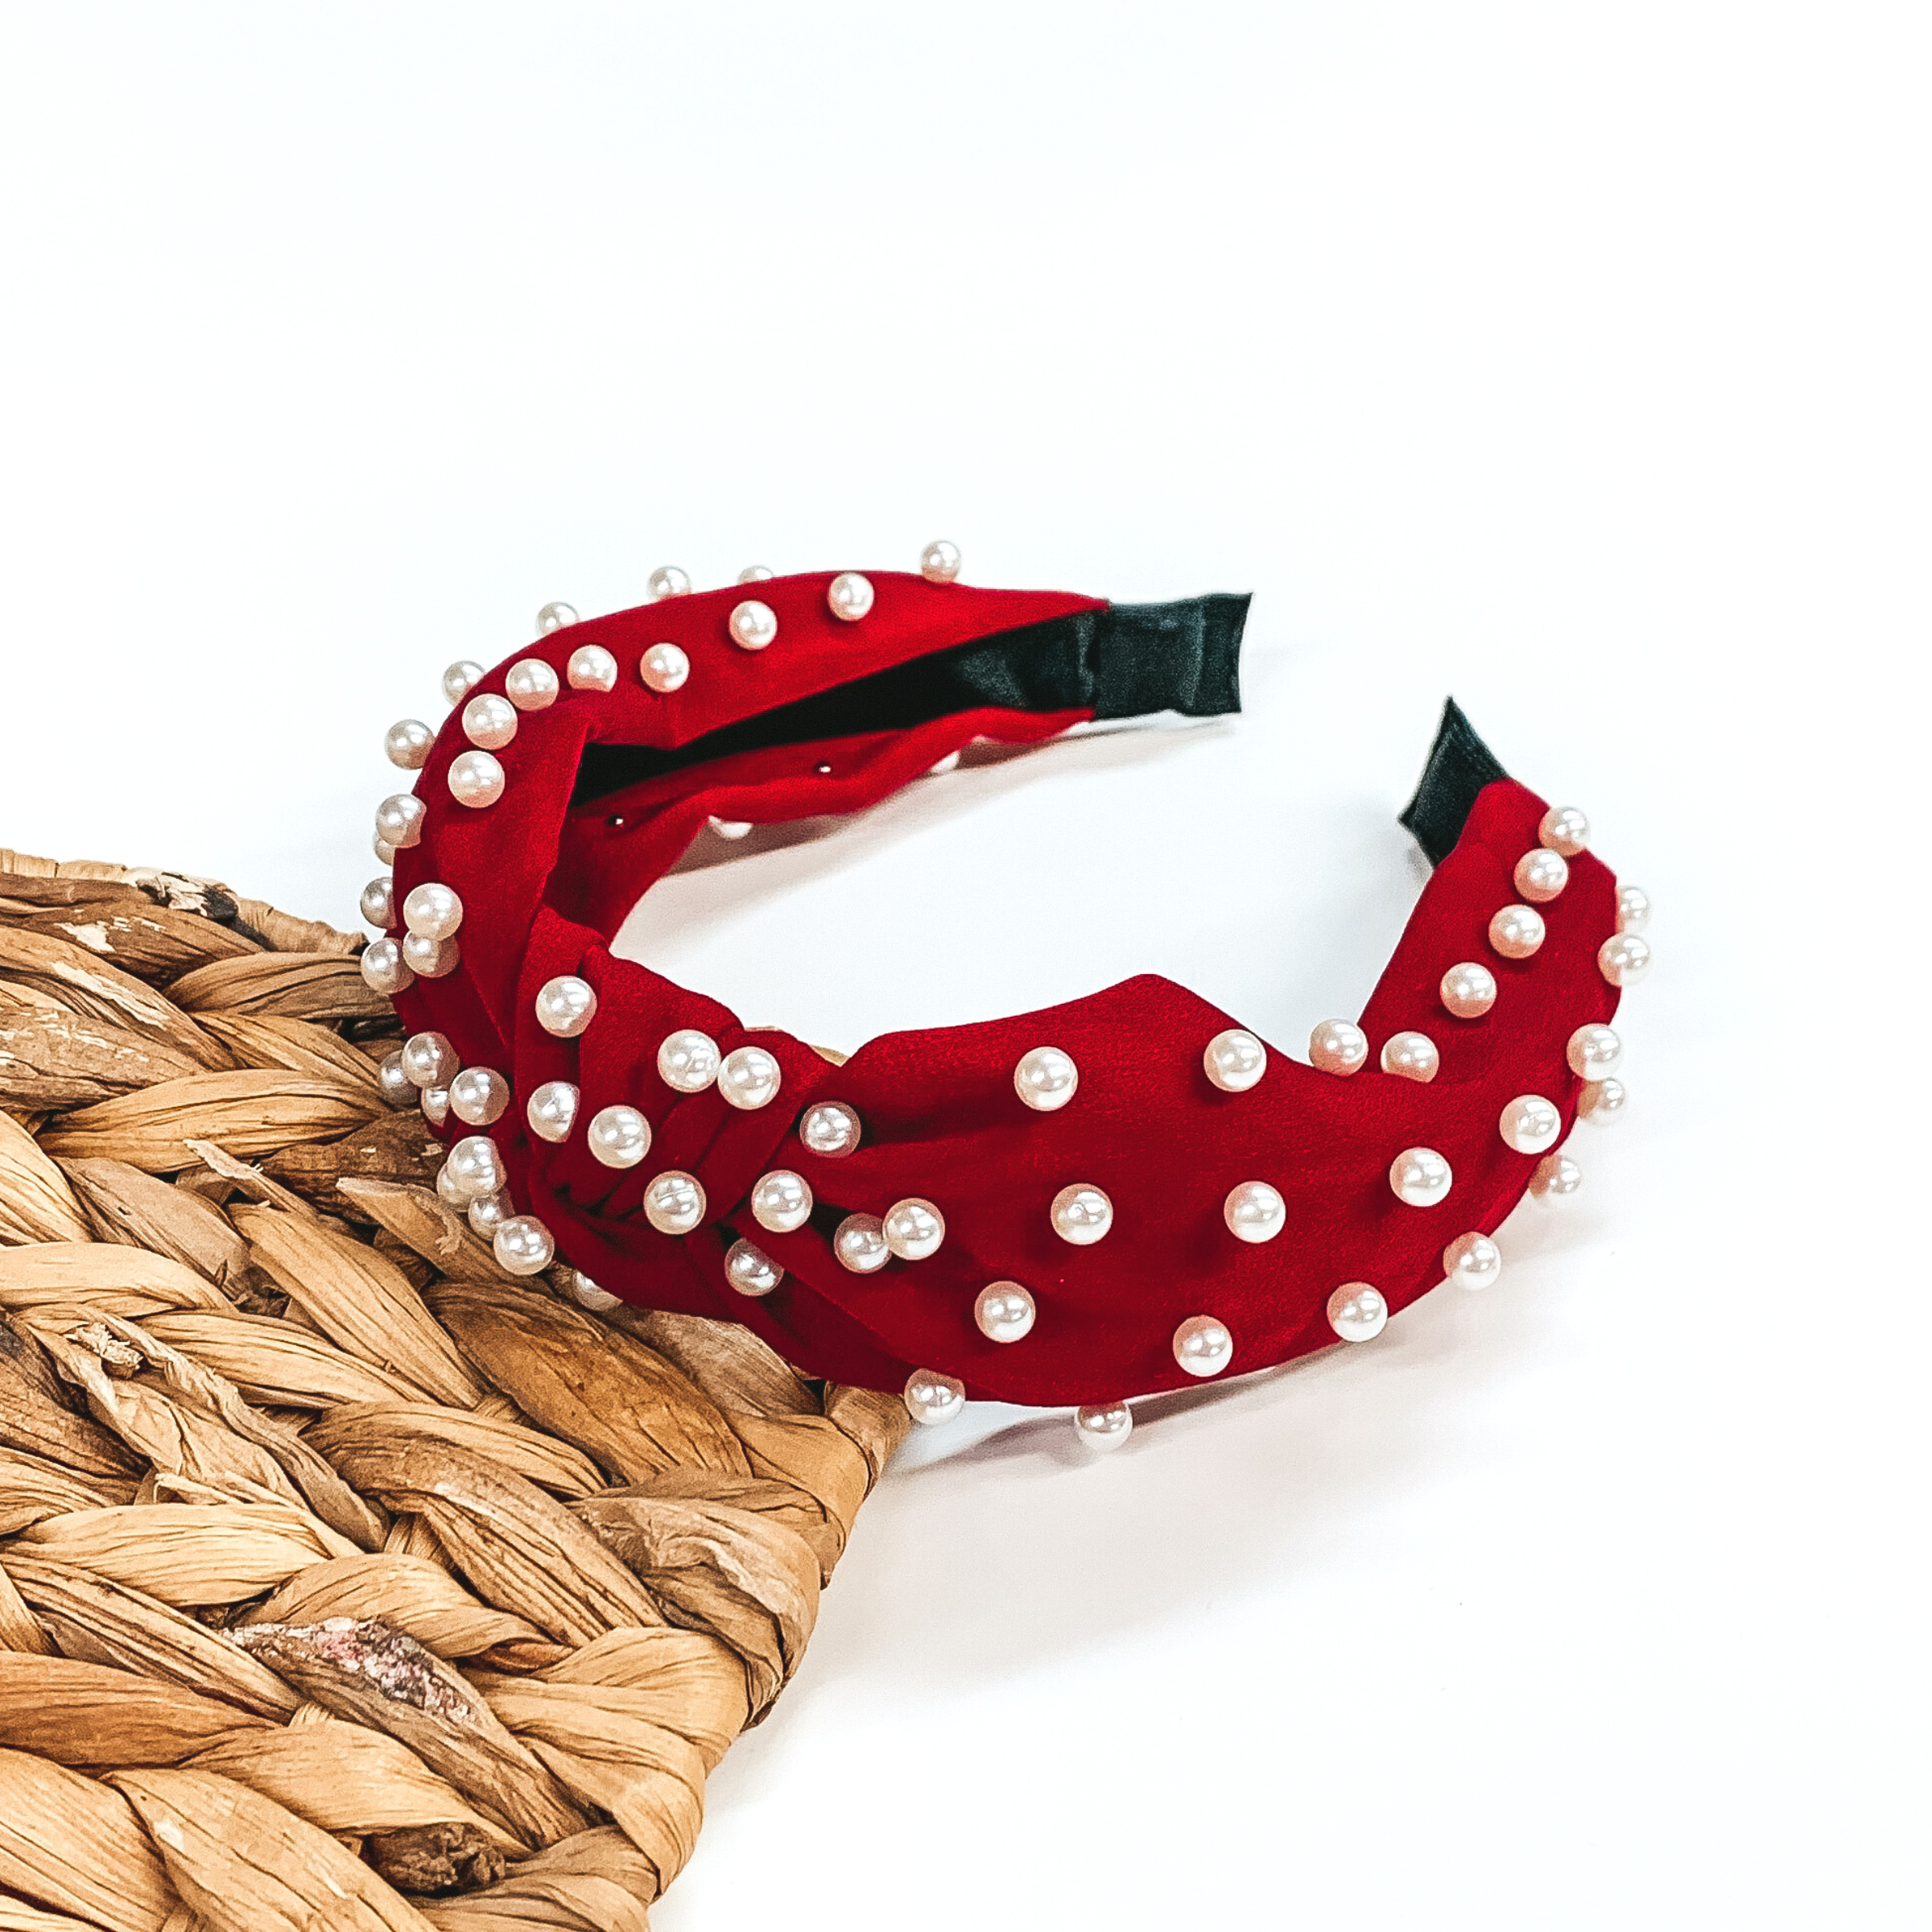 Dark red headband with white pearl accents. This headband is pictured laying partially on a basket weave board on a white background.